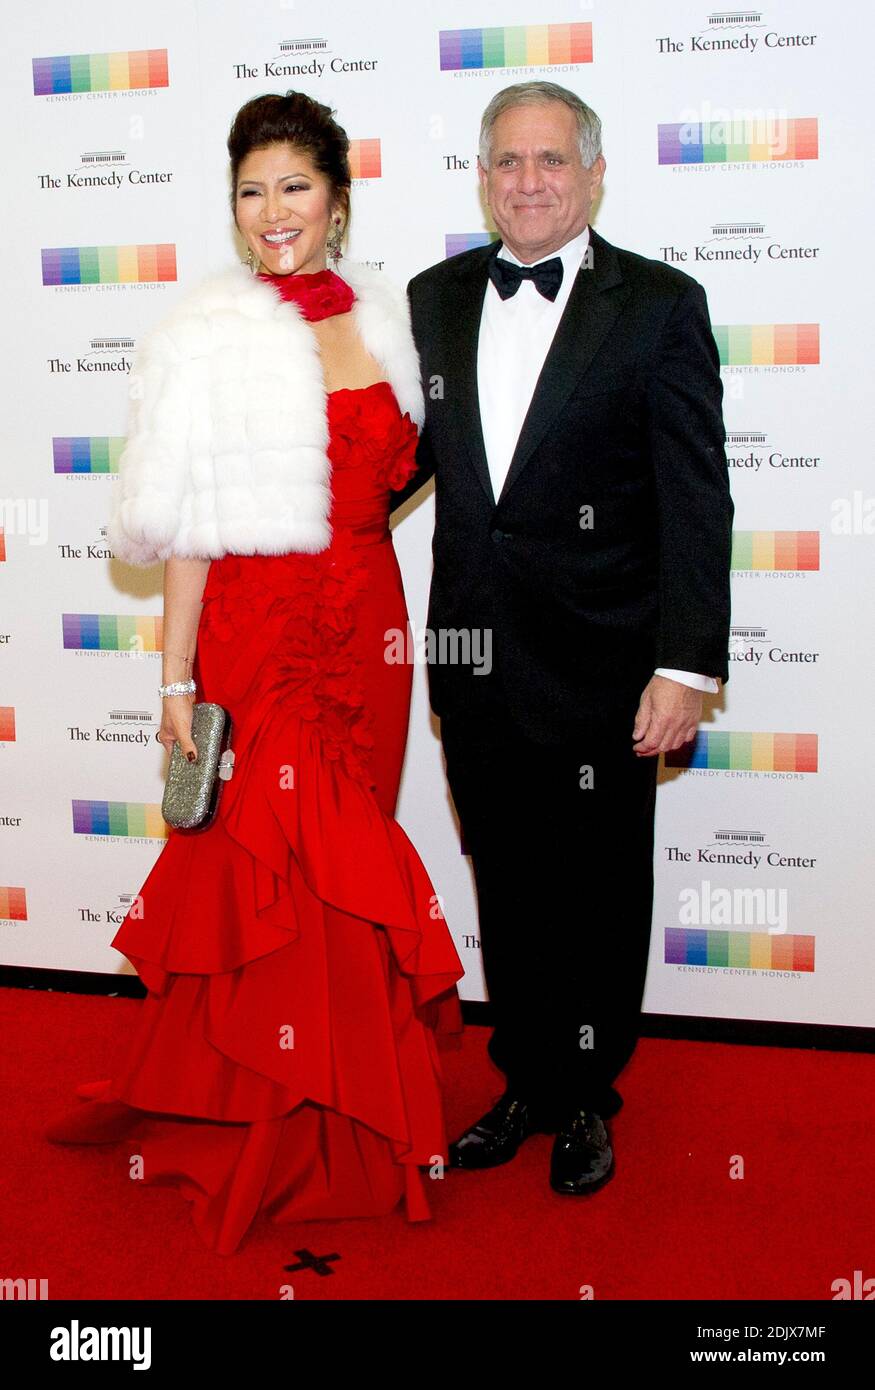 Julie Chen and Les Moonves arrive for the formal Artist's Dinner honoring the recipients of the 39th Annual Kennedy Center Honors hosted by United States Secretary of State John F. Kerry at the U.S. Department of State in Washington, D.C. on Saturday, December 3, 2016. The 2016 honorees are: Argentine pianist Martha Argerich; rock band the Eagles; screen and stage actor Al Pacino; gospel and blues singer Mavis Staples; and musician James Taylor. Photo by Ron Sachs /Pool via CNP/ABACAPRESS.COM Stock Photo